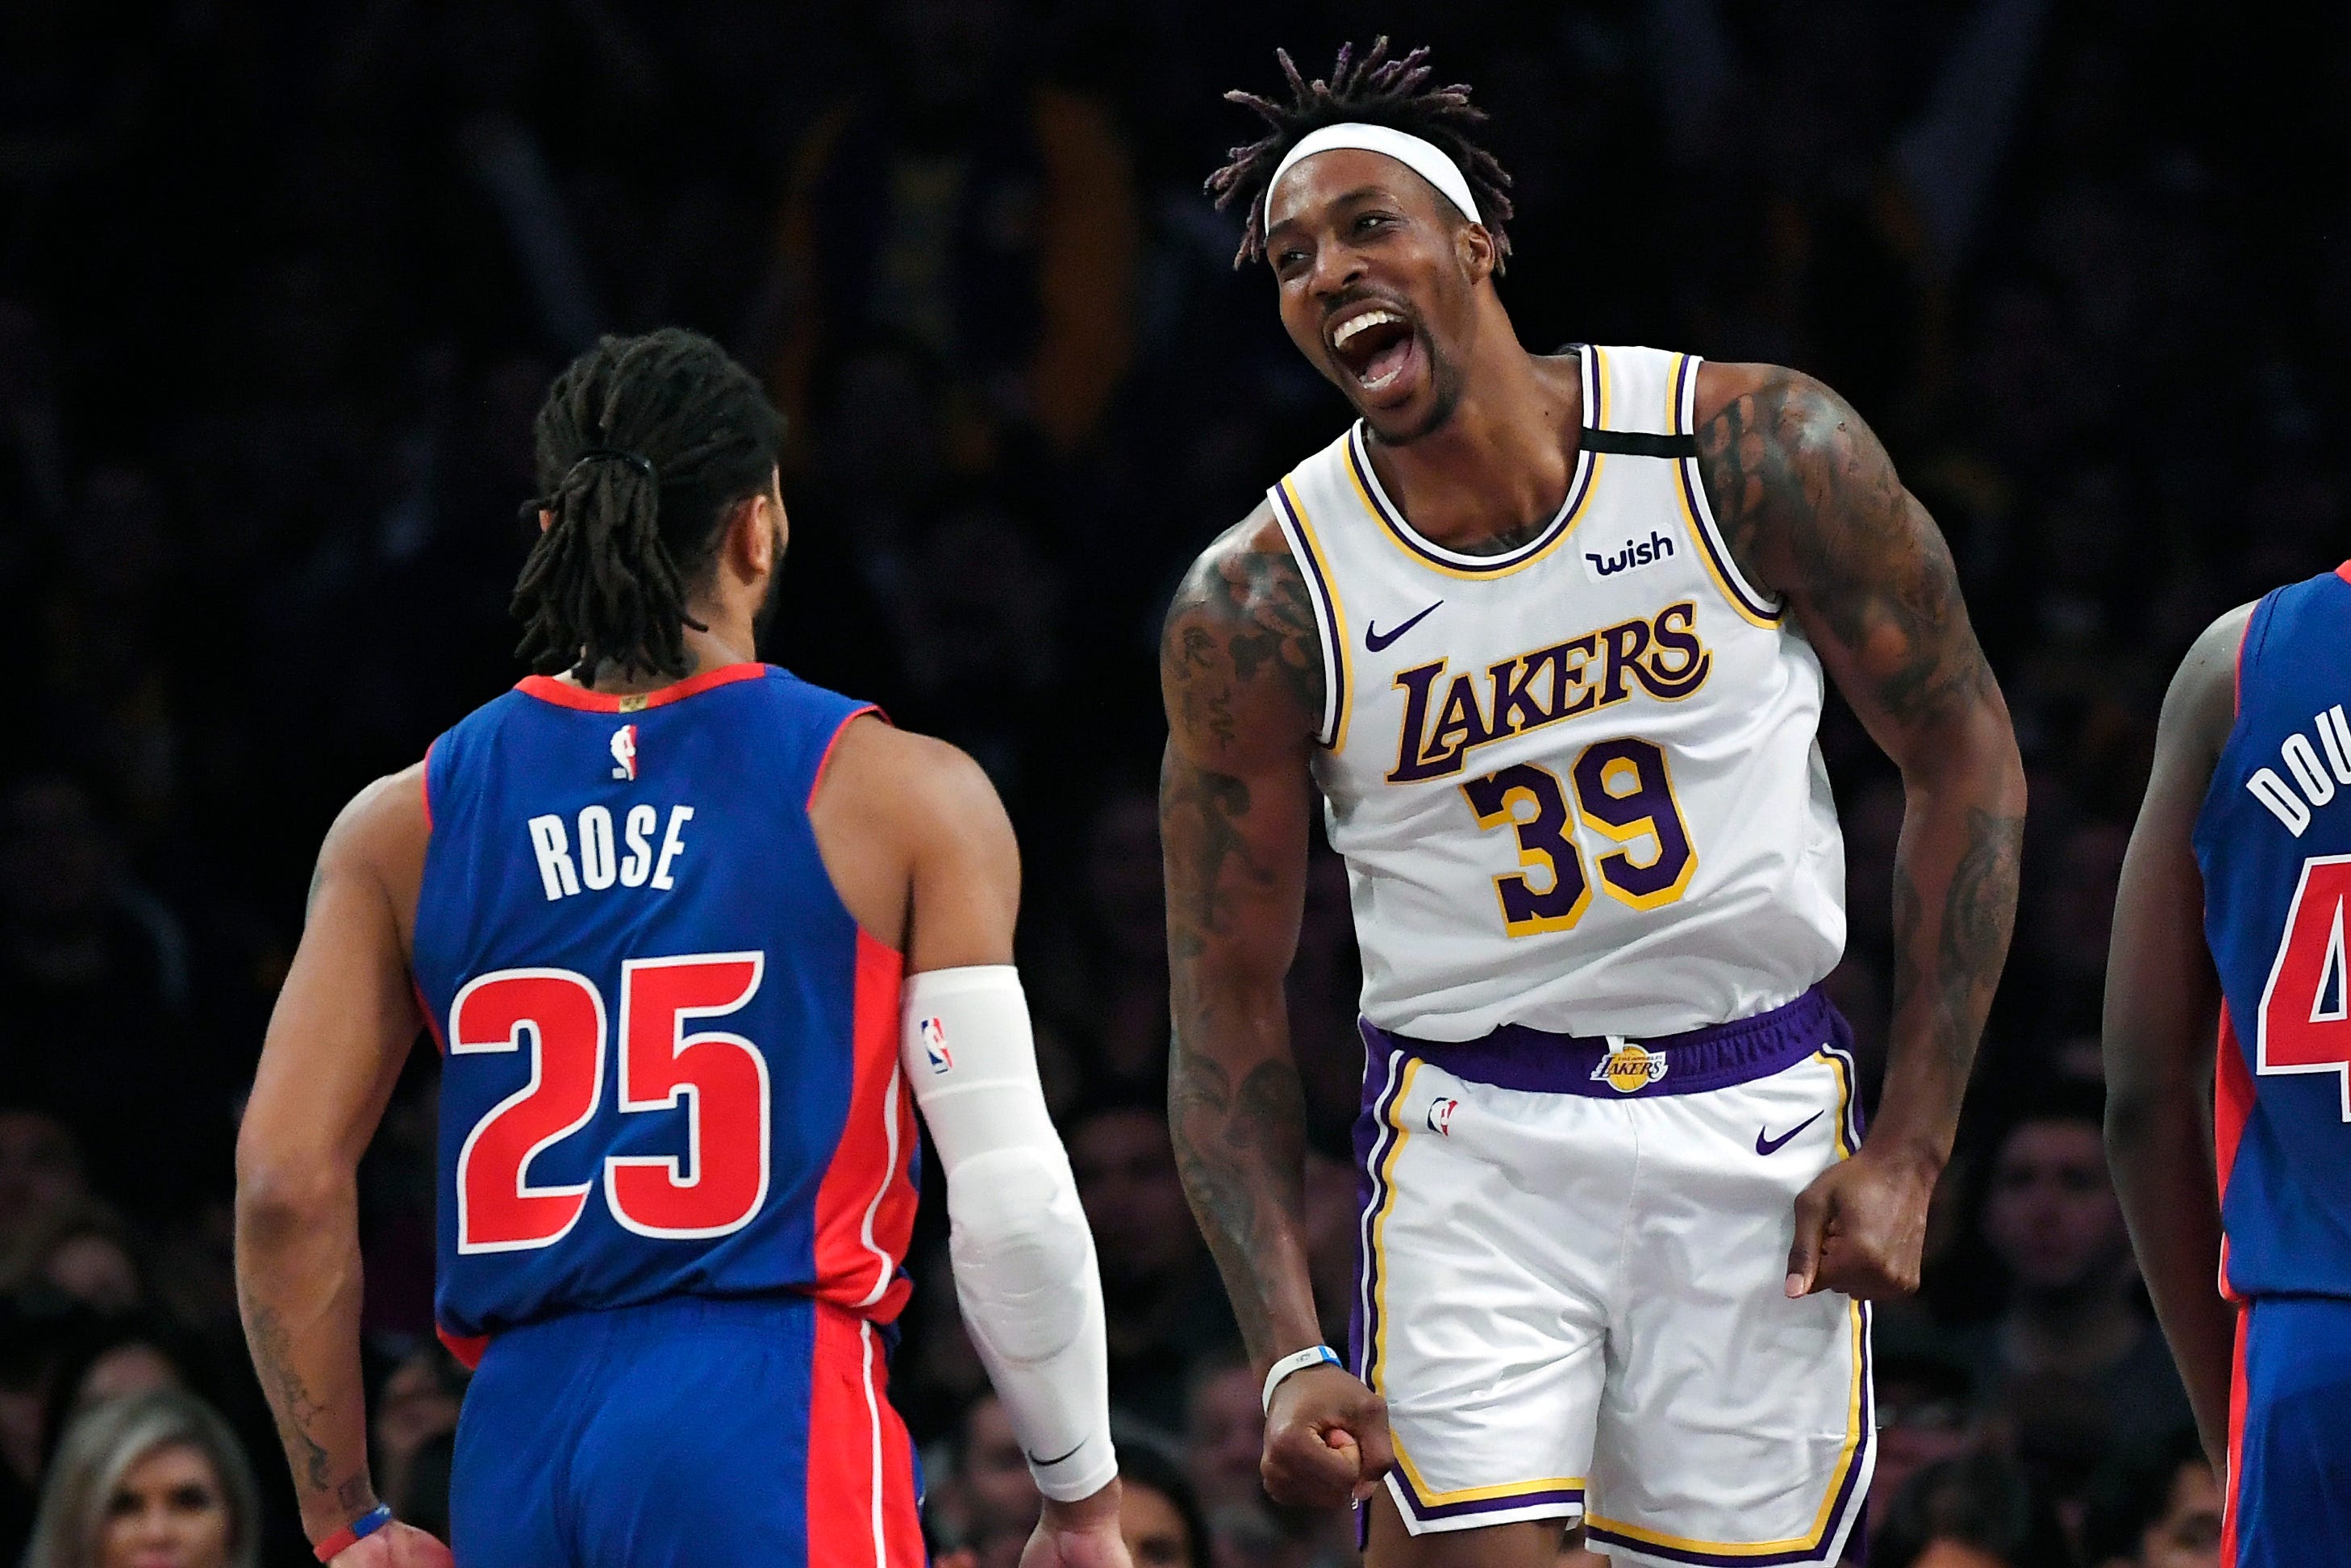 Los Angeles Lakers center Dwight Howard (39) celebrates after scoring toward Detroit Pistons guard Derrick Rose (25) during the second half of an NBA basketball game, Sunday, Jan. 5, 2020, in Los Angeles. The Lakers won 106-99.